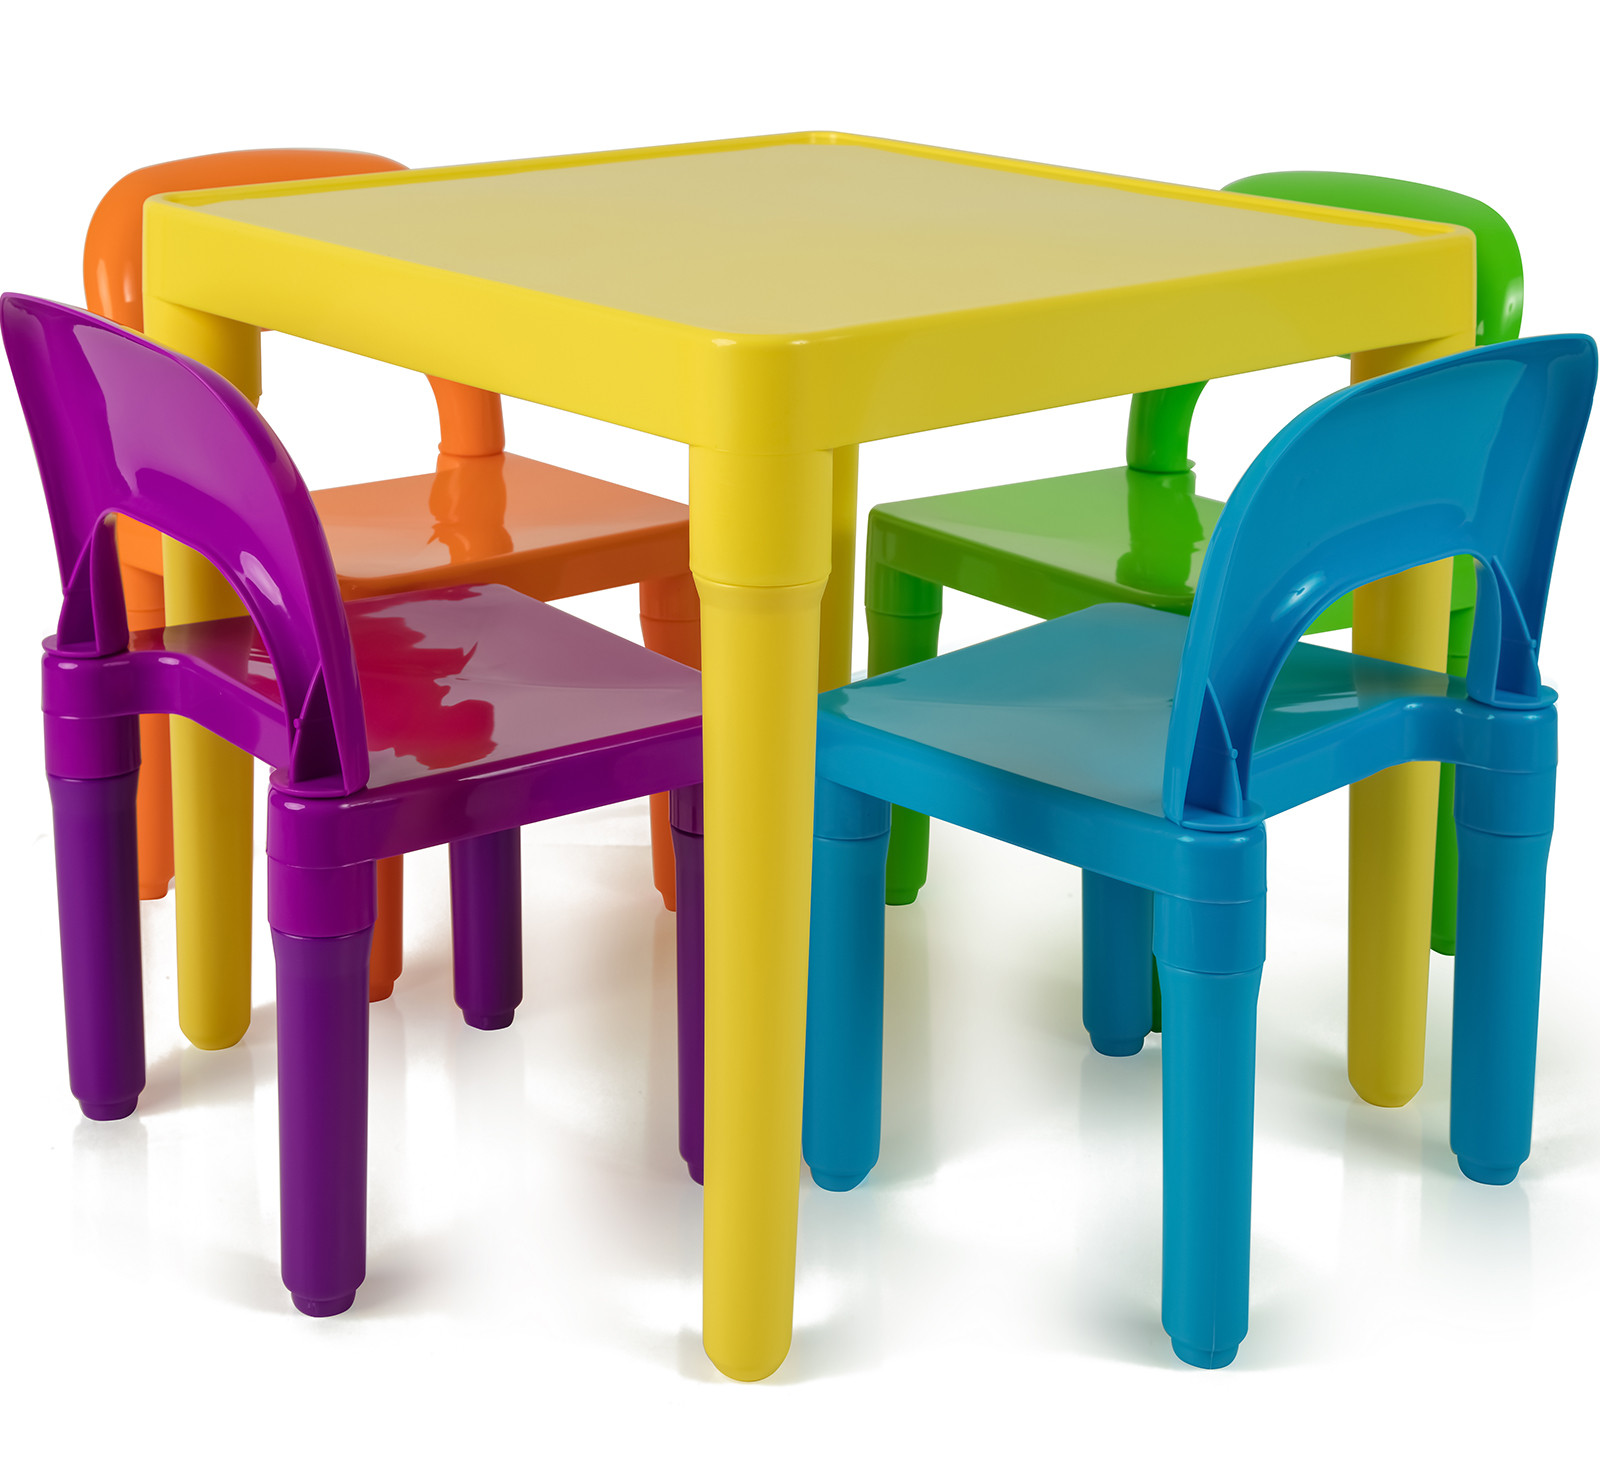 Kids Table And Bench Set
 Kids Table and Chairs Play Set Toddler Child Toy Activity